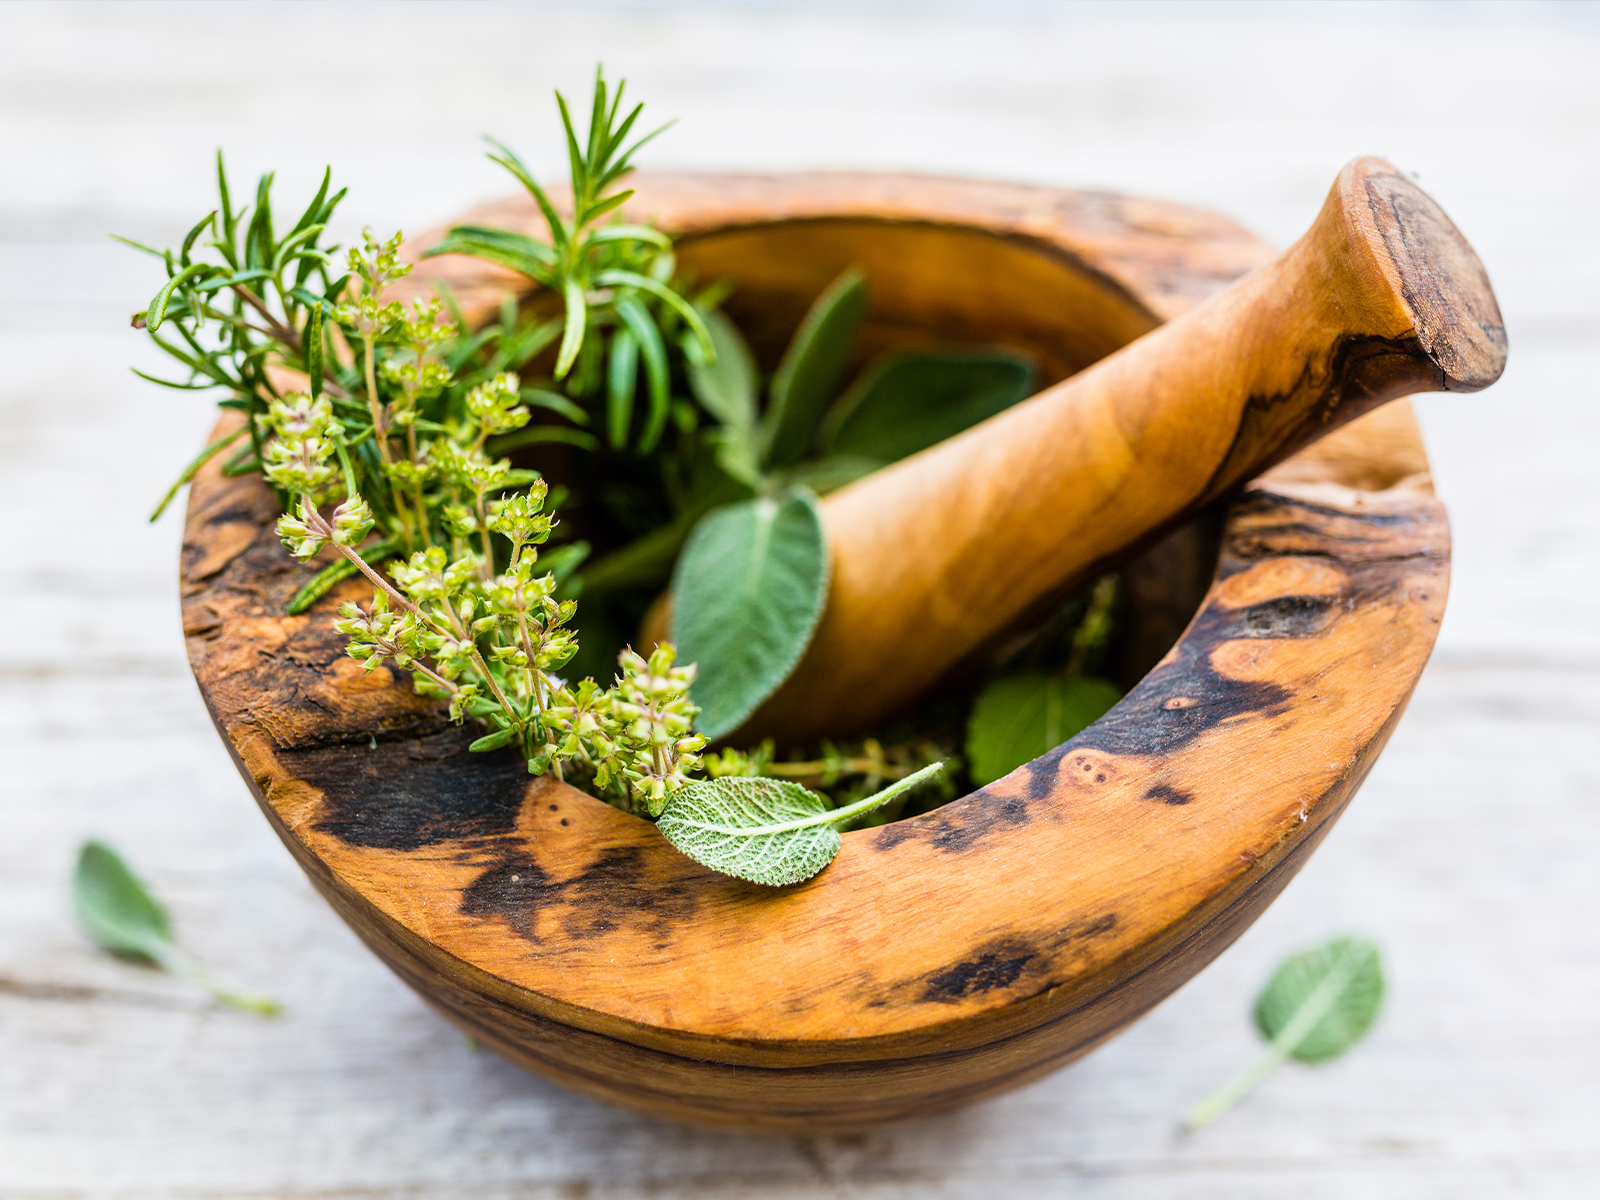 wooden mortar & pestle with fresh herbs